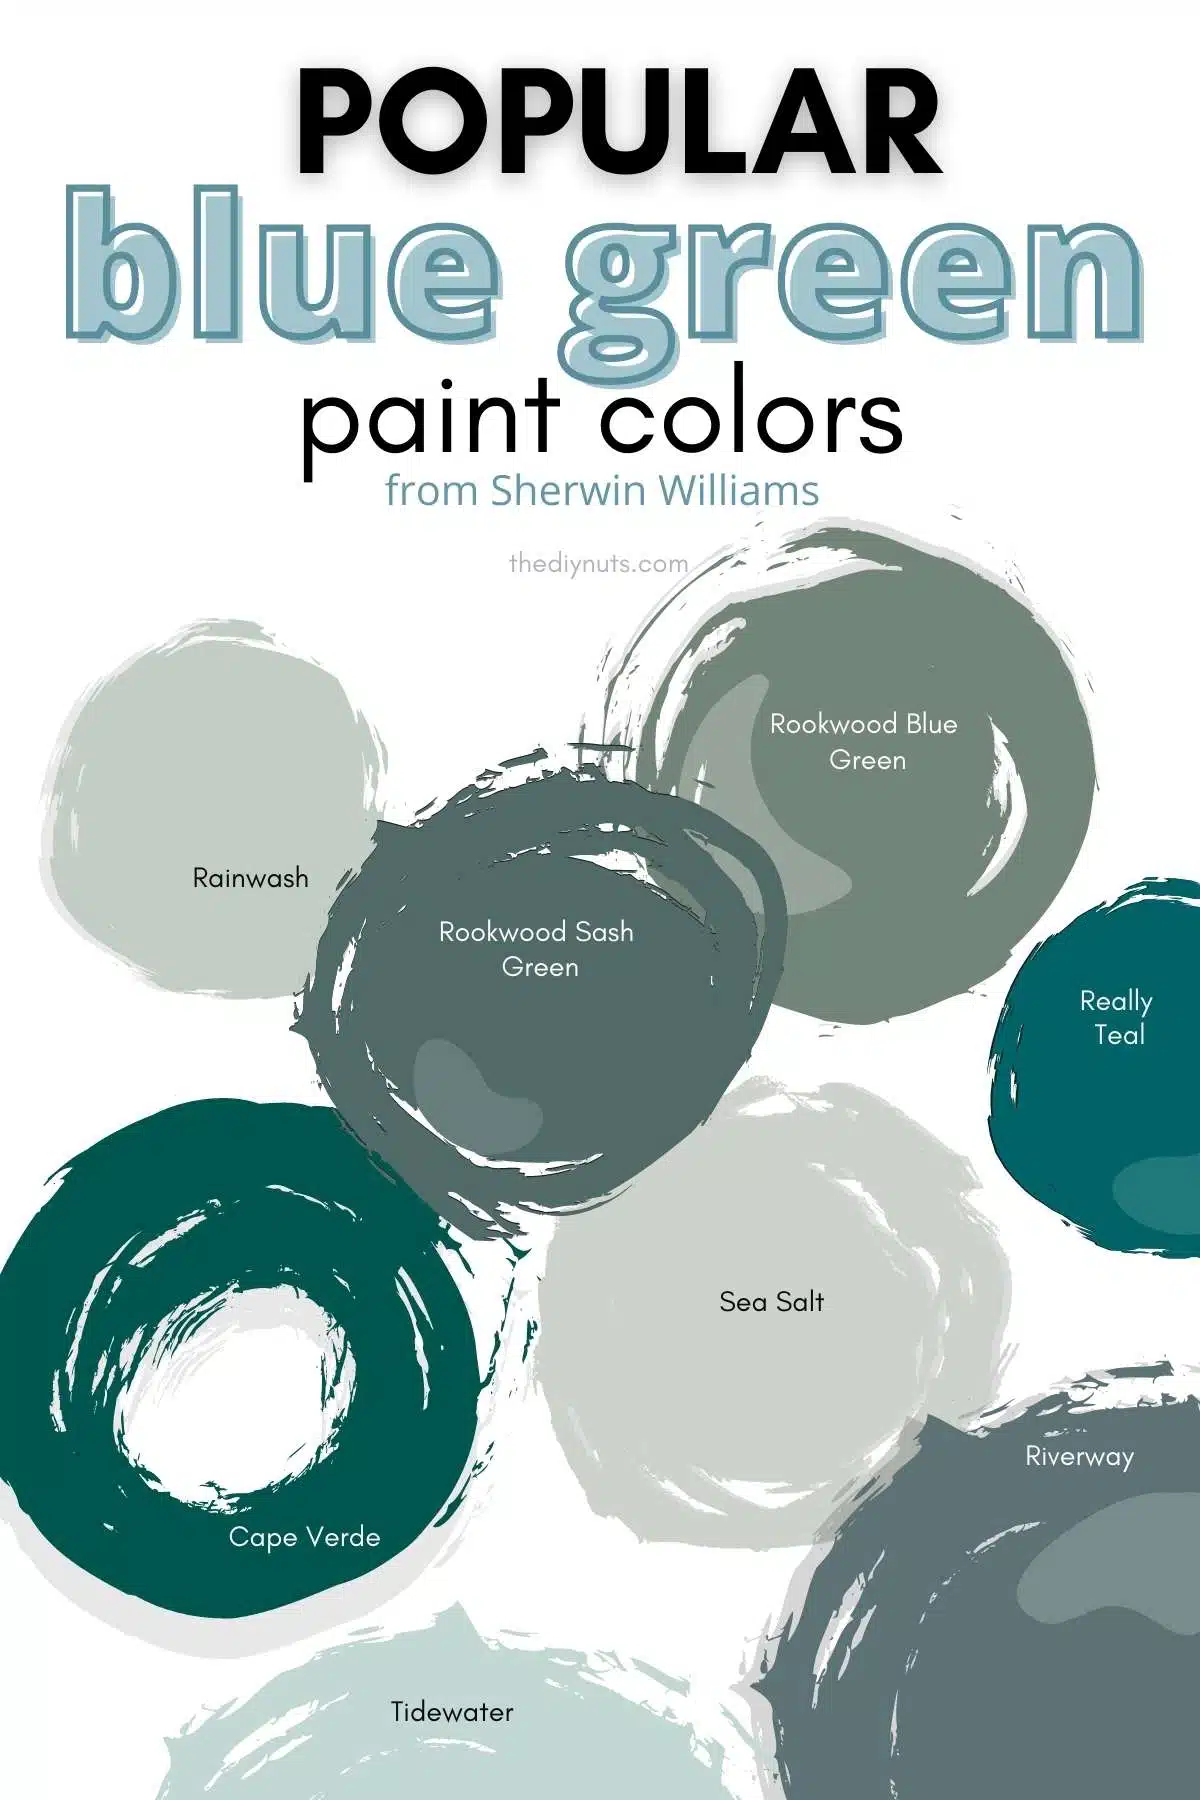 different blue green paint colors with text popular blue green paint colors.